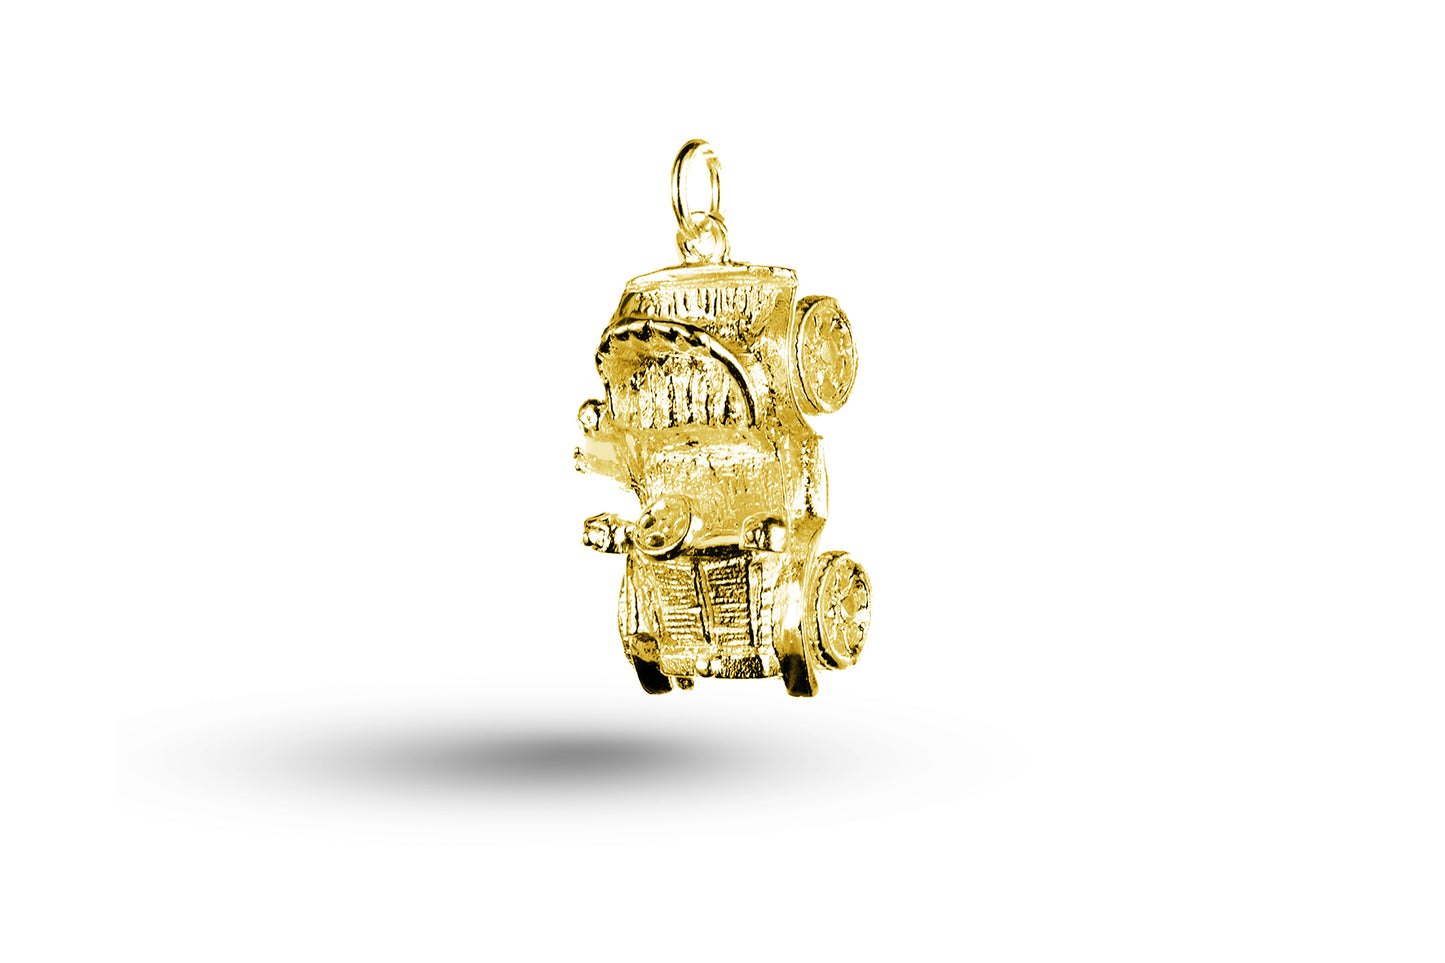 Yellow gold Moving Vintage Car charm.